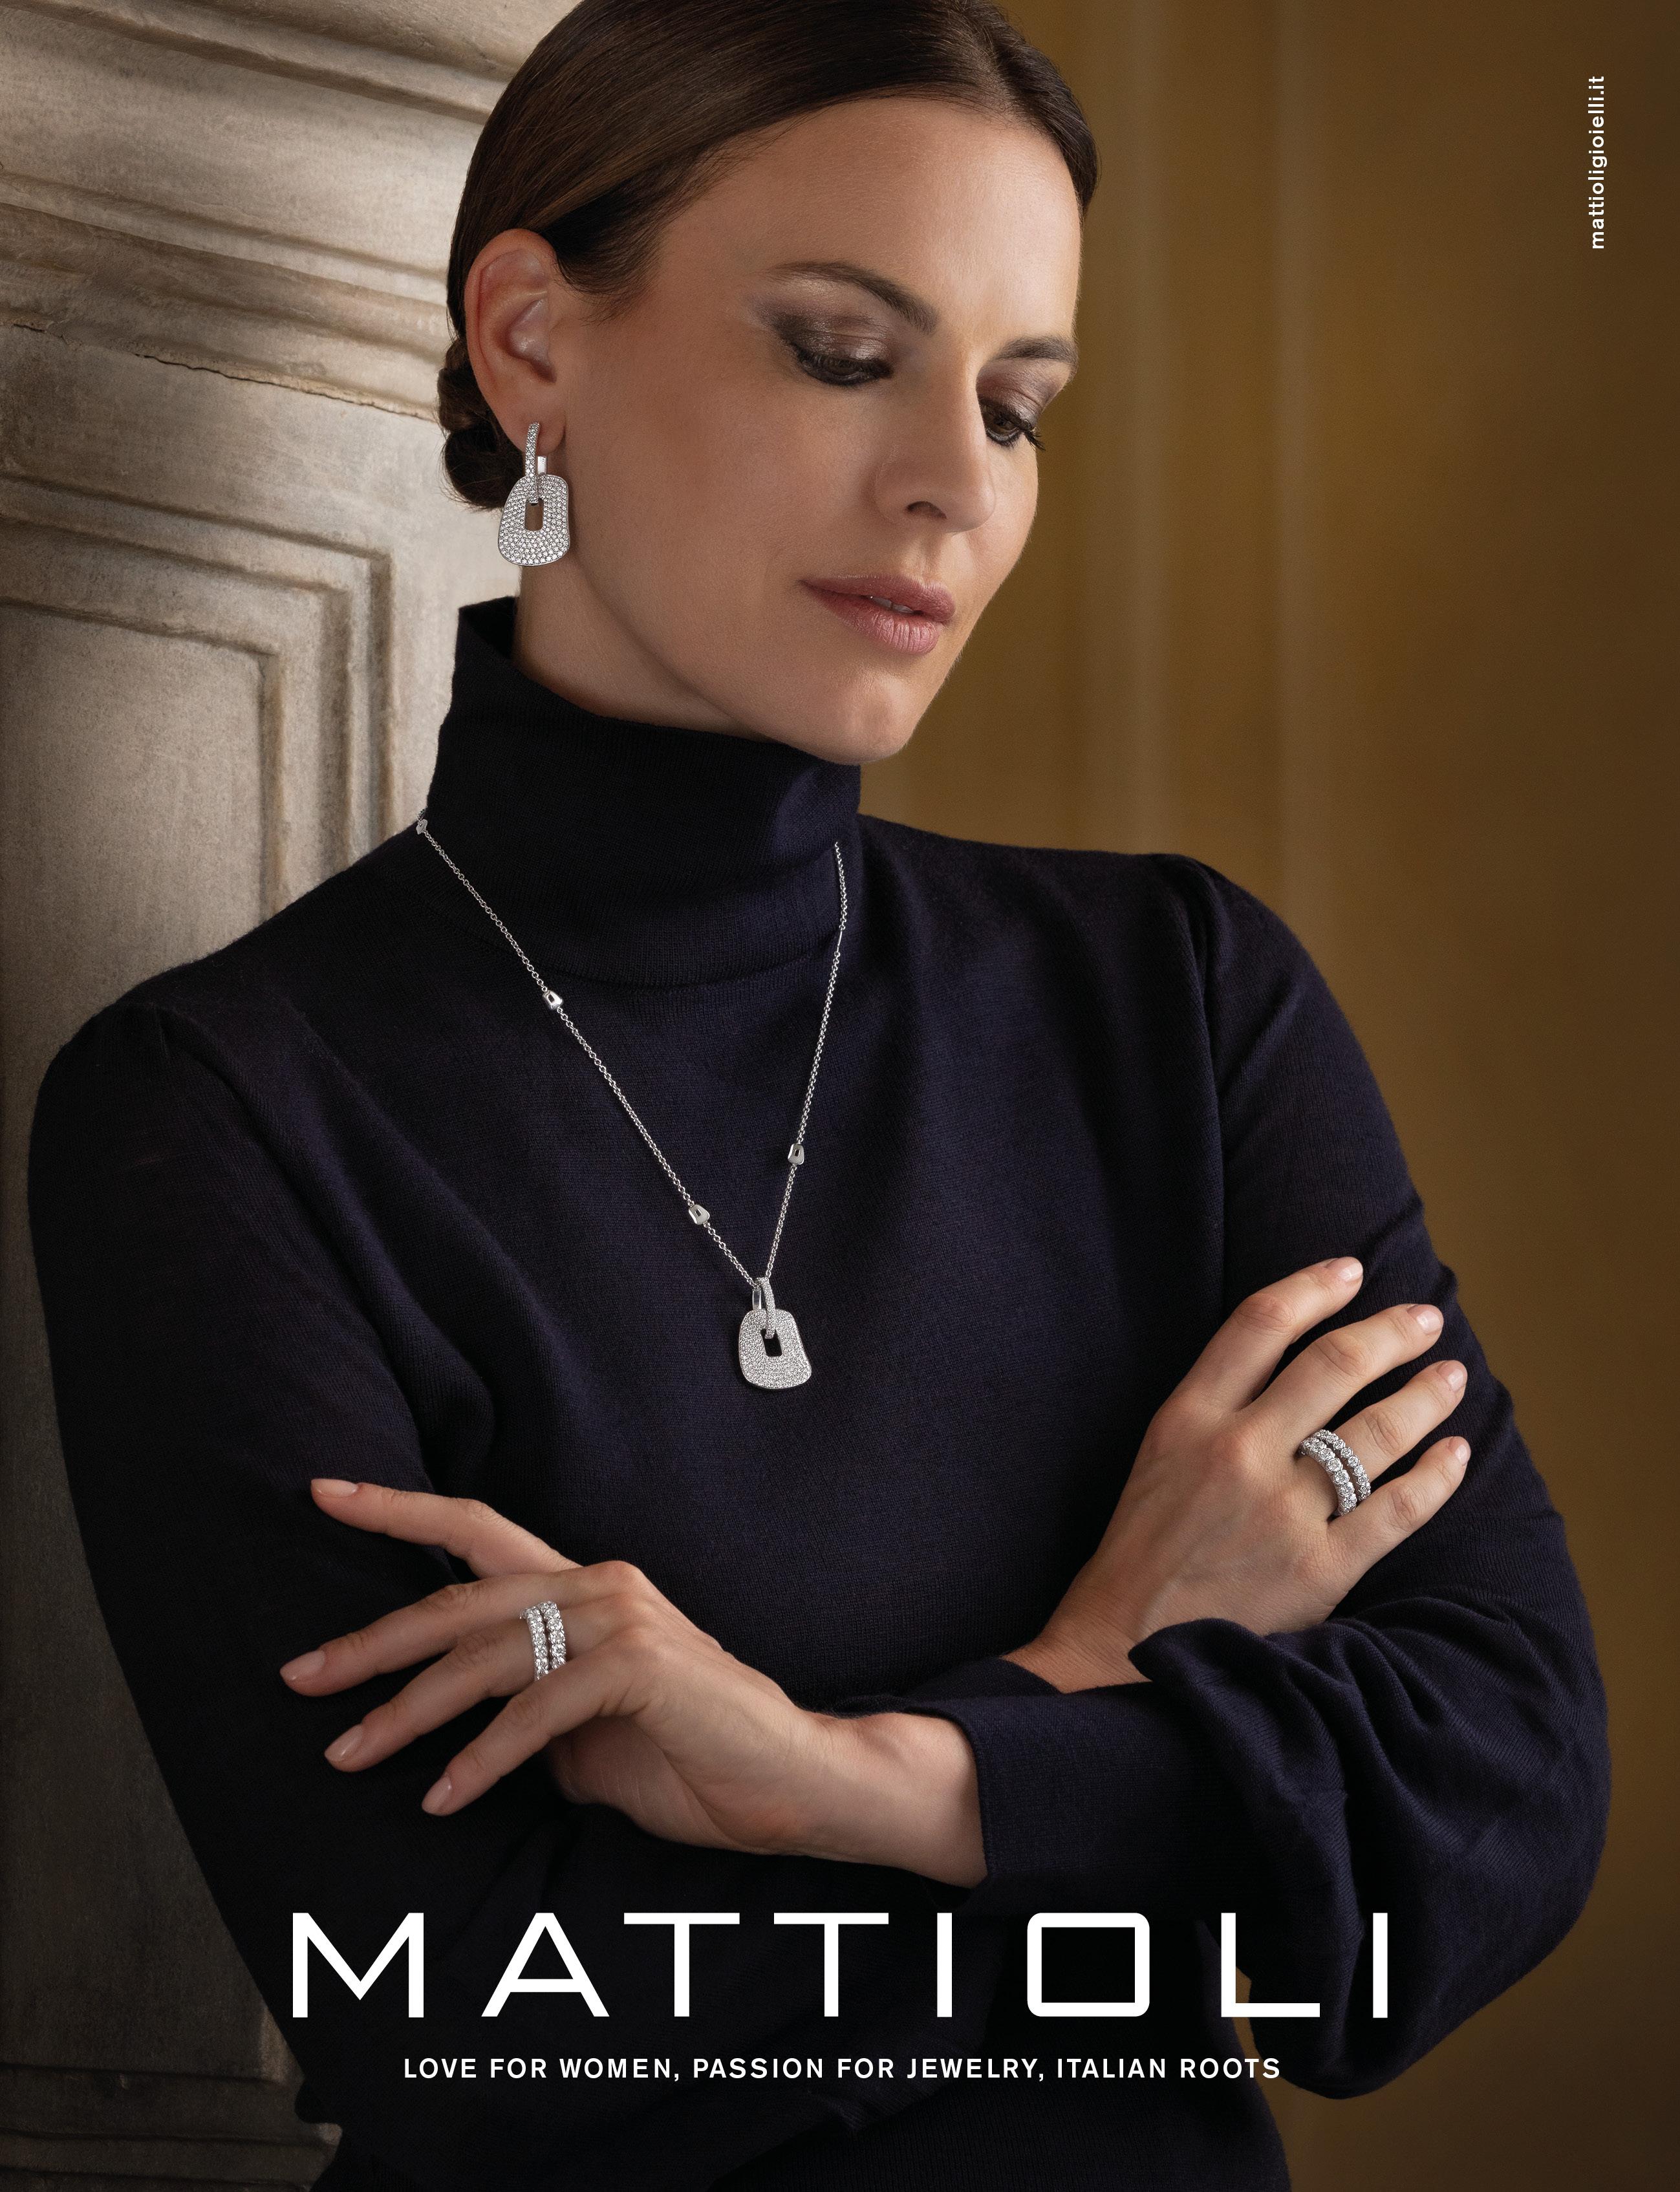 Mattioli Puzzle Collection 18 Karat in White Gold, White Diamonds Small Size Earrings
Also available in Rose Gold and Brown Diamonds
Measure 15x18 mm / 0,59x0,70 in. 
Gold Weight 05,20 gr. 
Diamonds 0,34 ct.

READY TO SHIP
*Shipment of this piece is